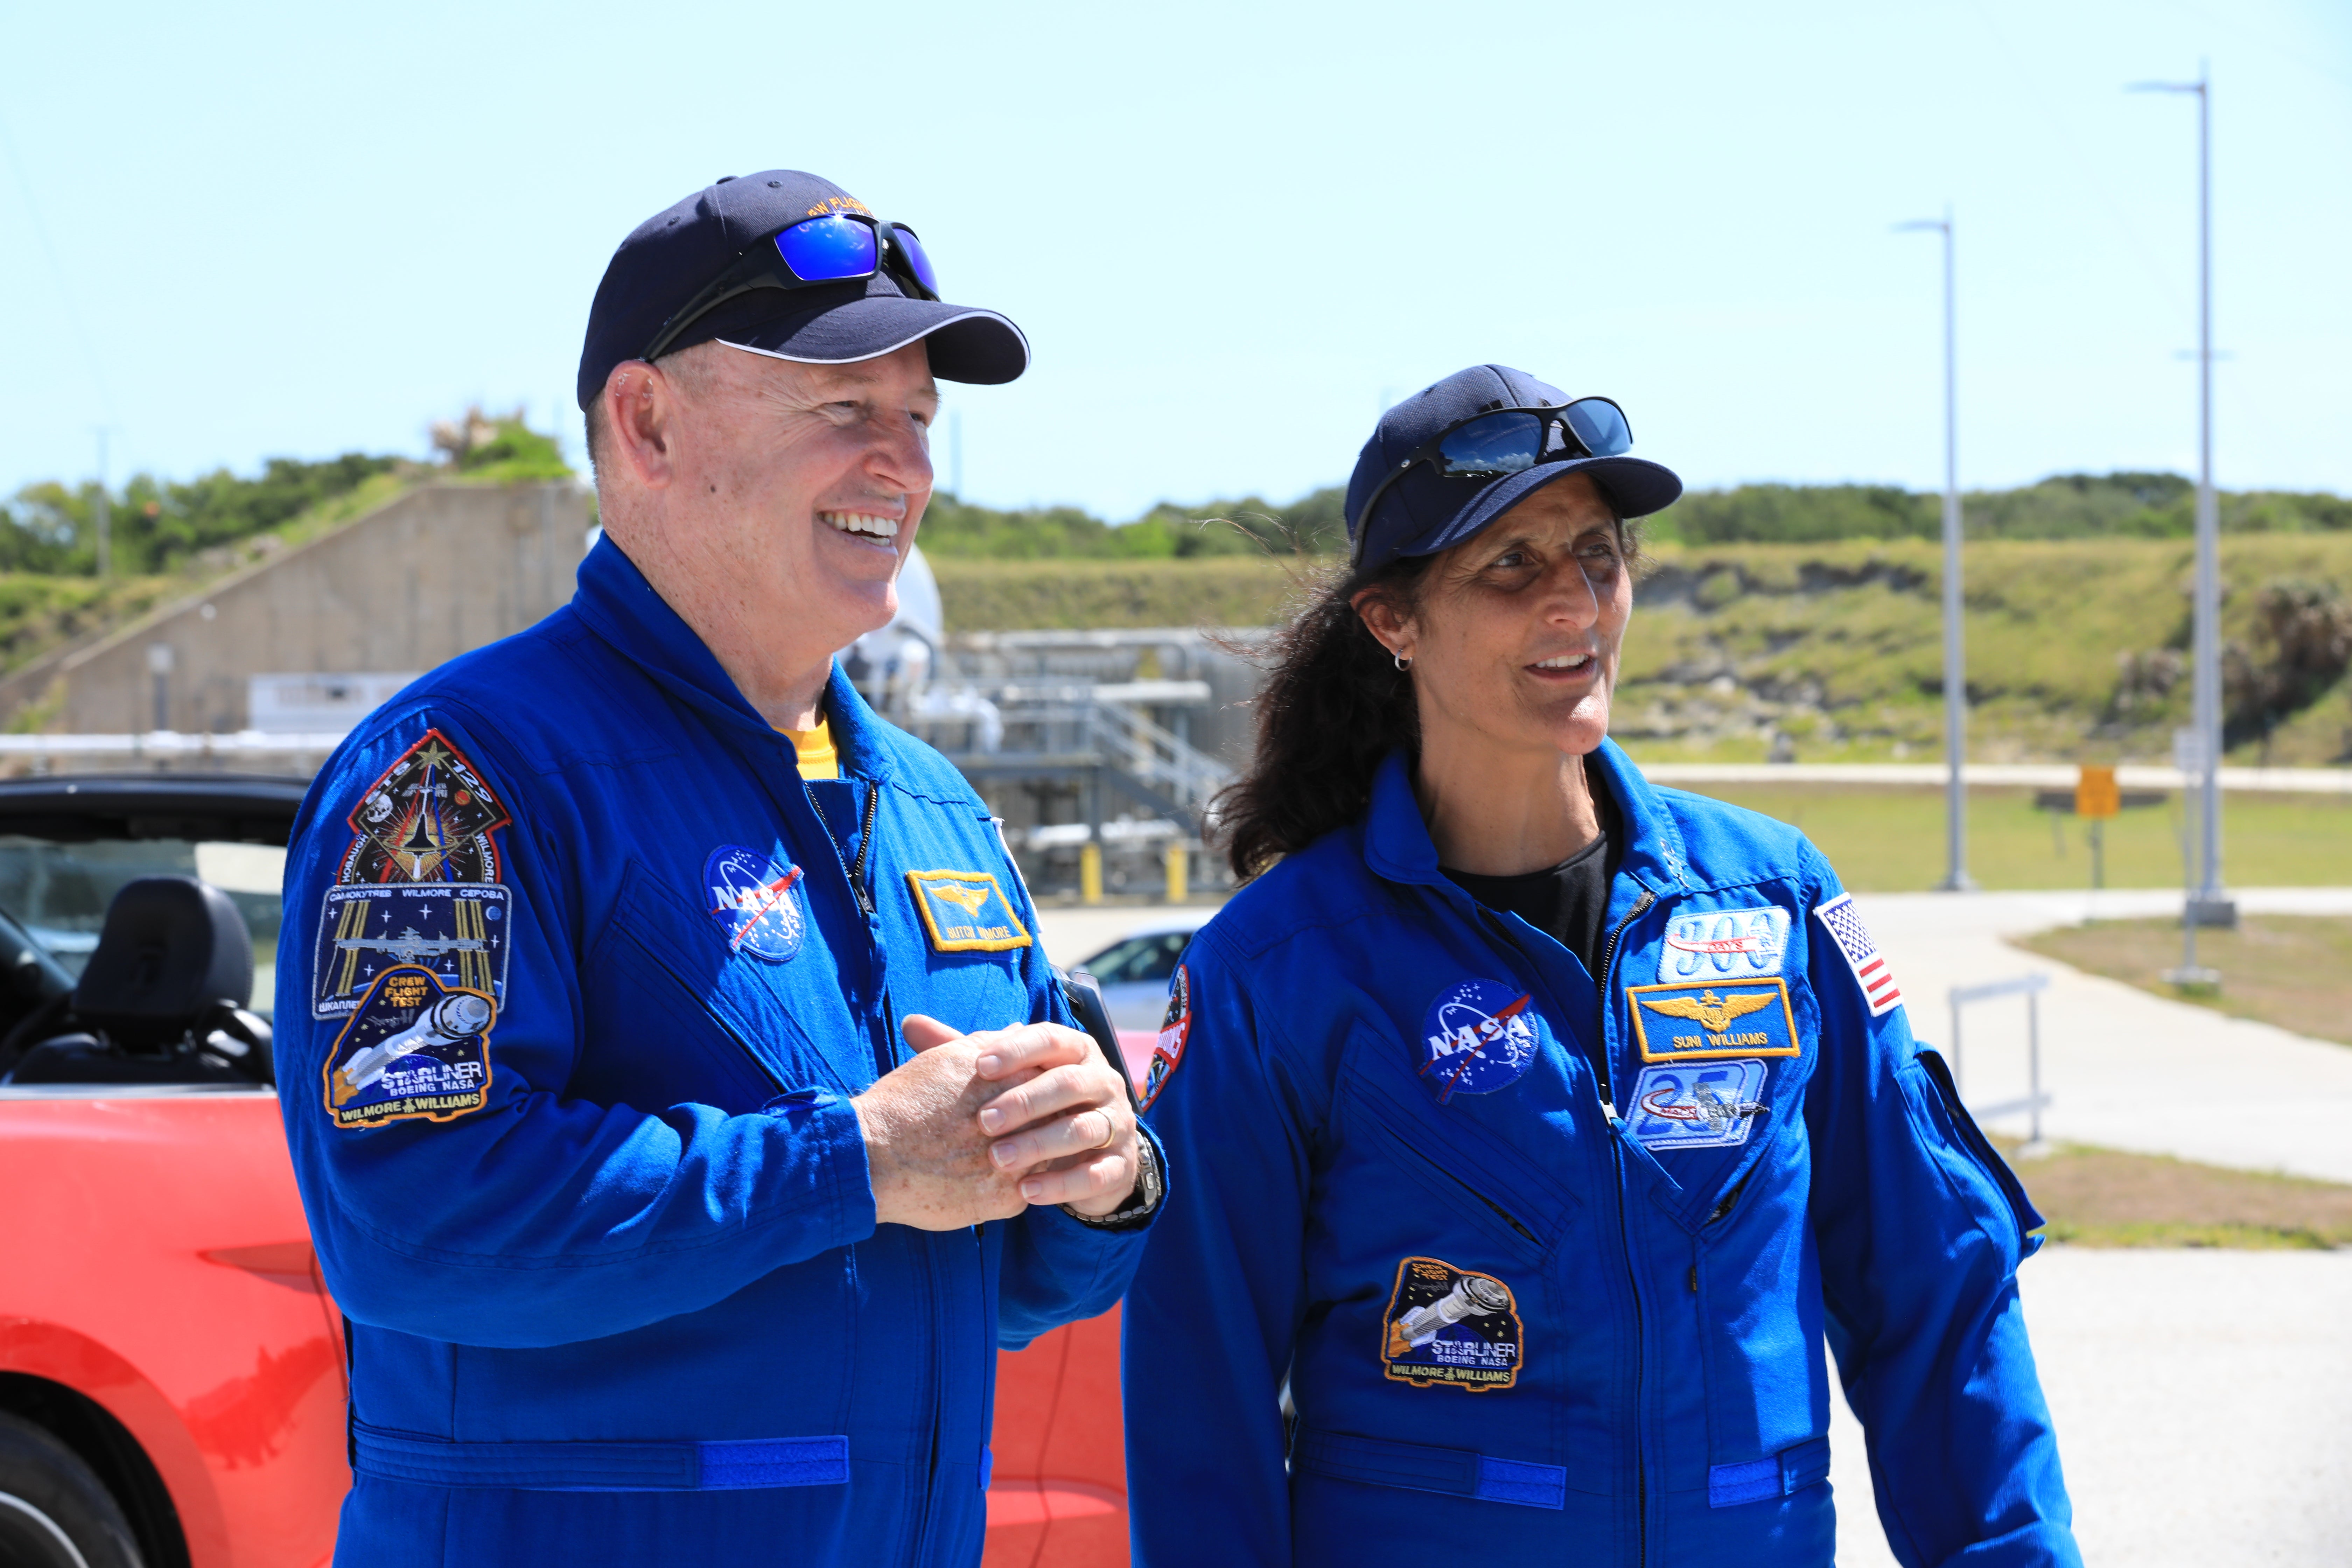 From left, NASA astronauts Barry “Butch” Wilmore and Suni Williams, Boeing Crew Flight Test (CFT) commander and pilot